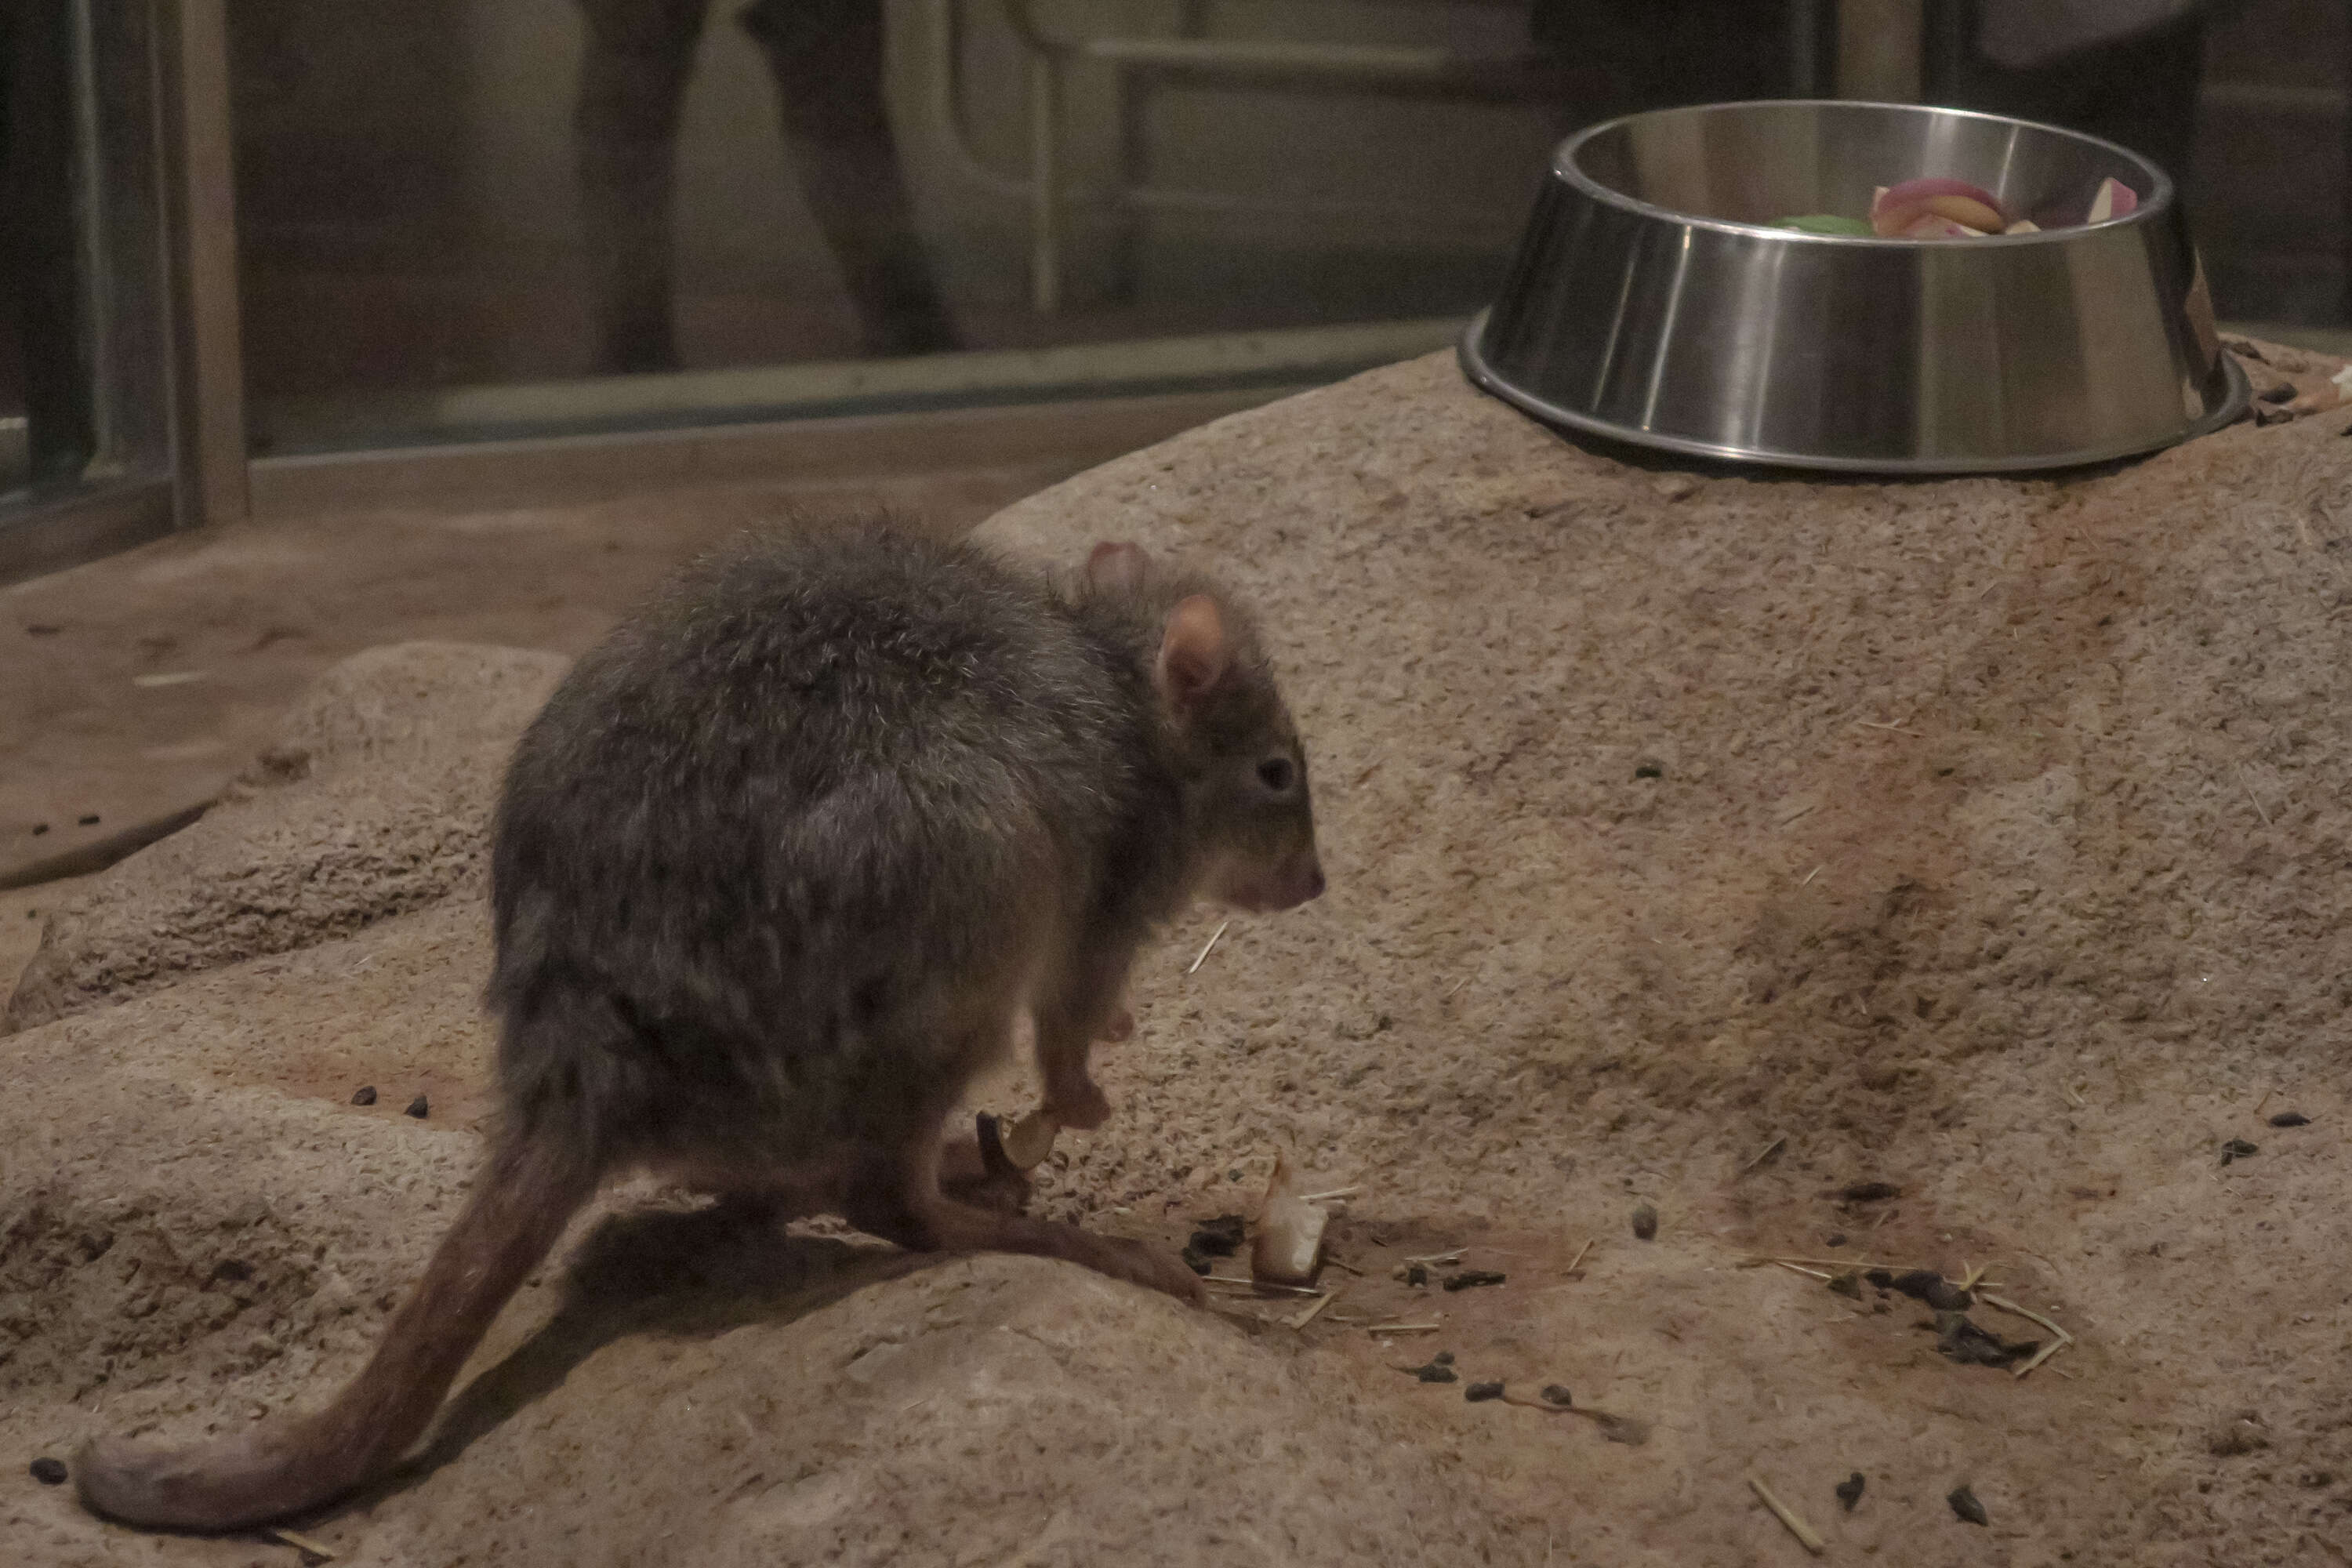 Image of Brush-tailed Bettong